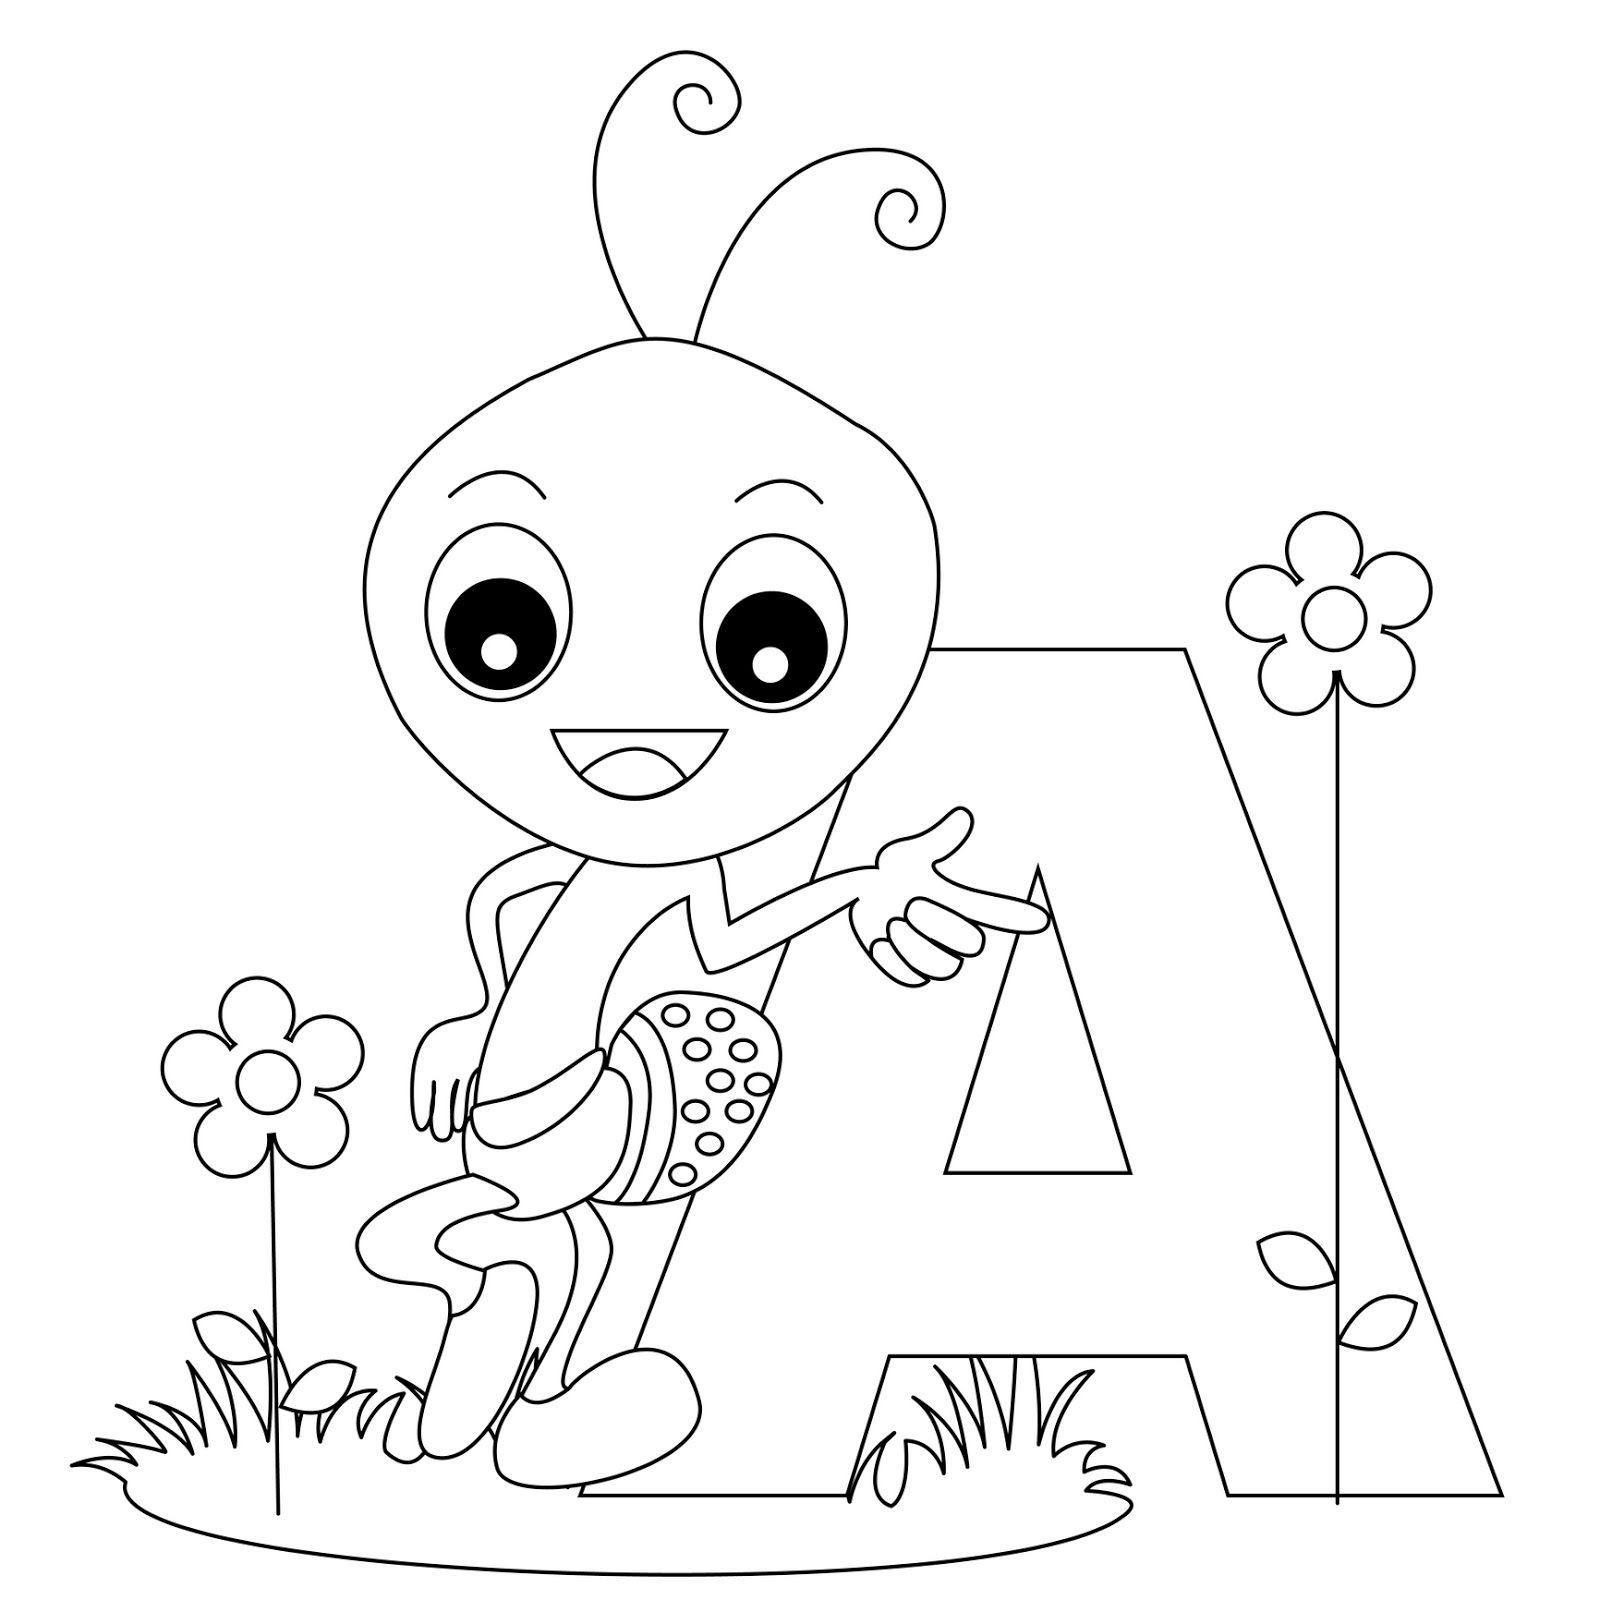 Alphabet With Funny Letters Coloring Pages - Coloring Home à Coloriage Alphabet